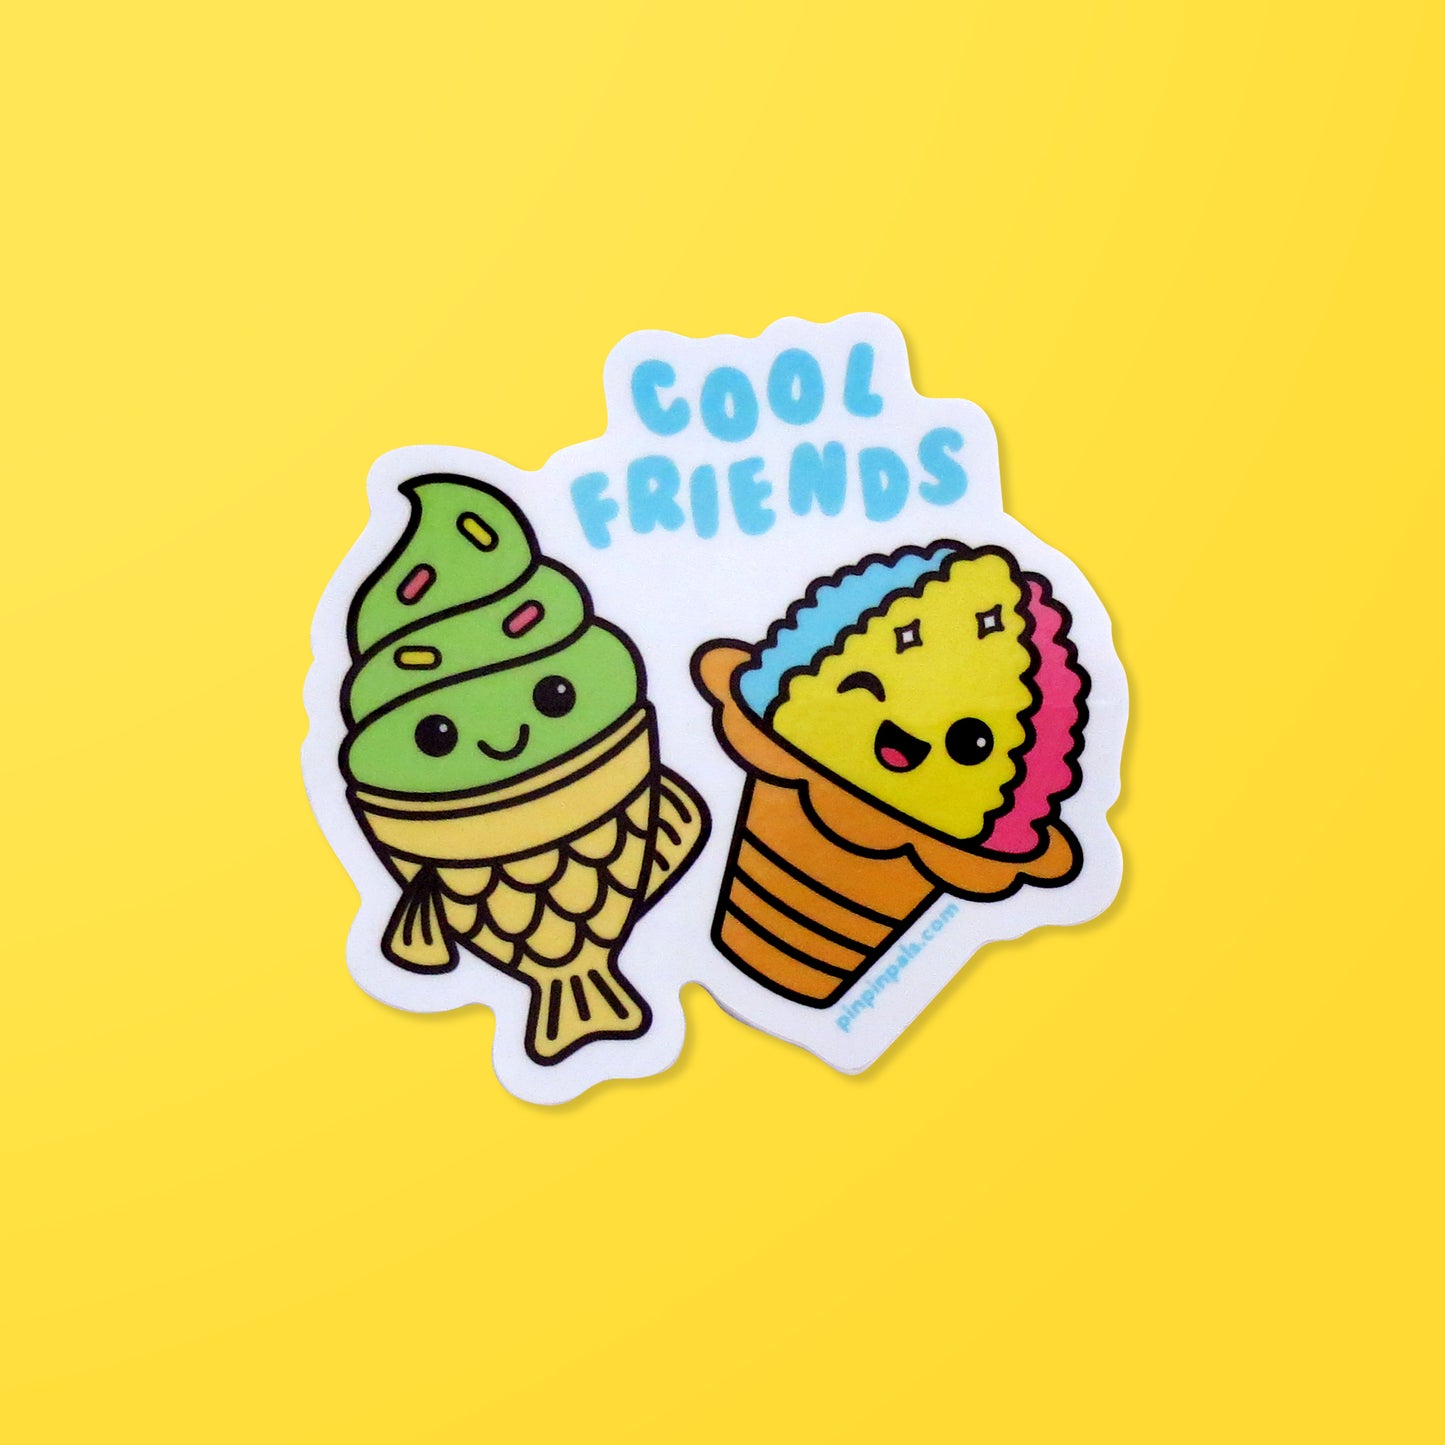 Cool Friends - Taiyaki and Shaved Ice vinyl sticker on yellow background